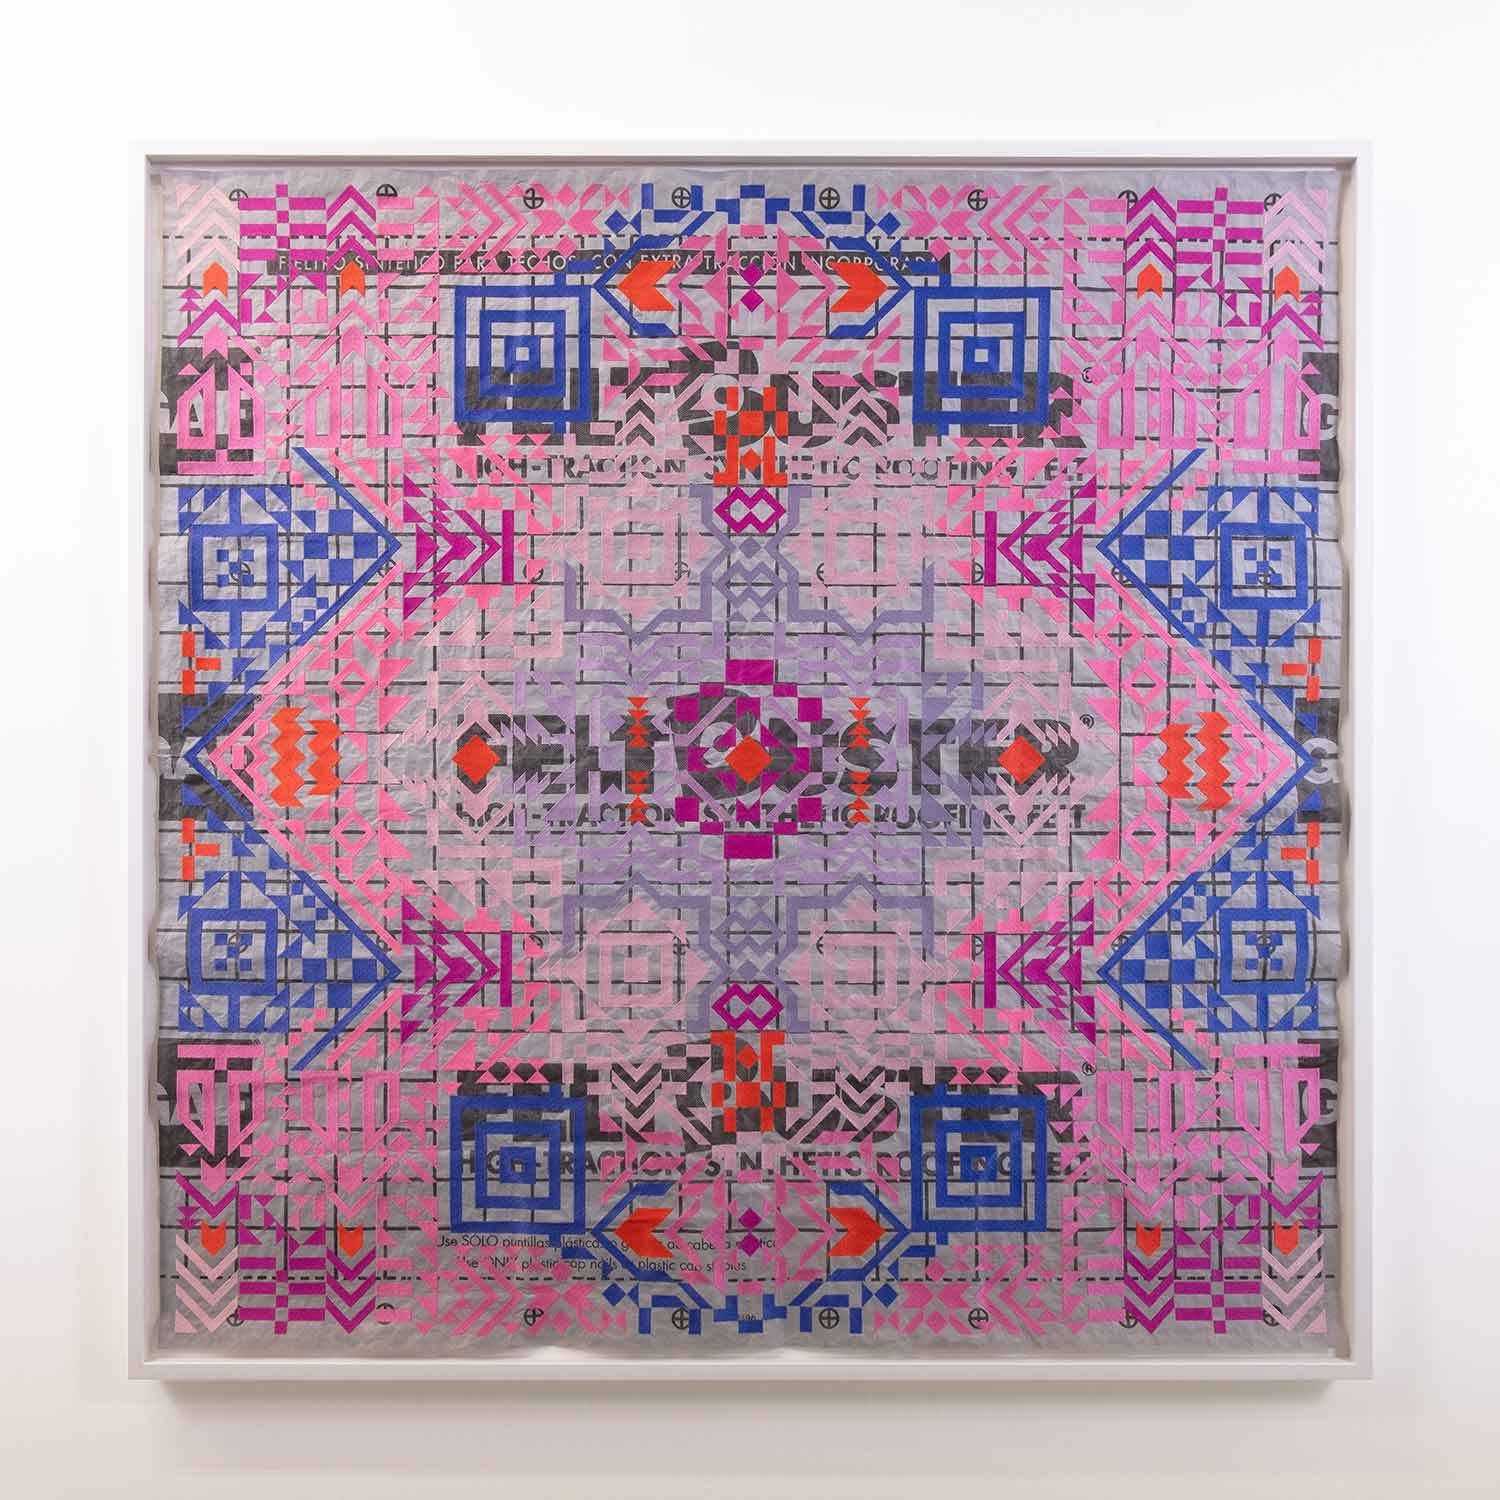 Caroline Monnet, Blanket 05, 2022, Embroideey on synthetic roofing felt, 48 x 48 in. (Copy)